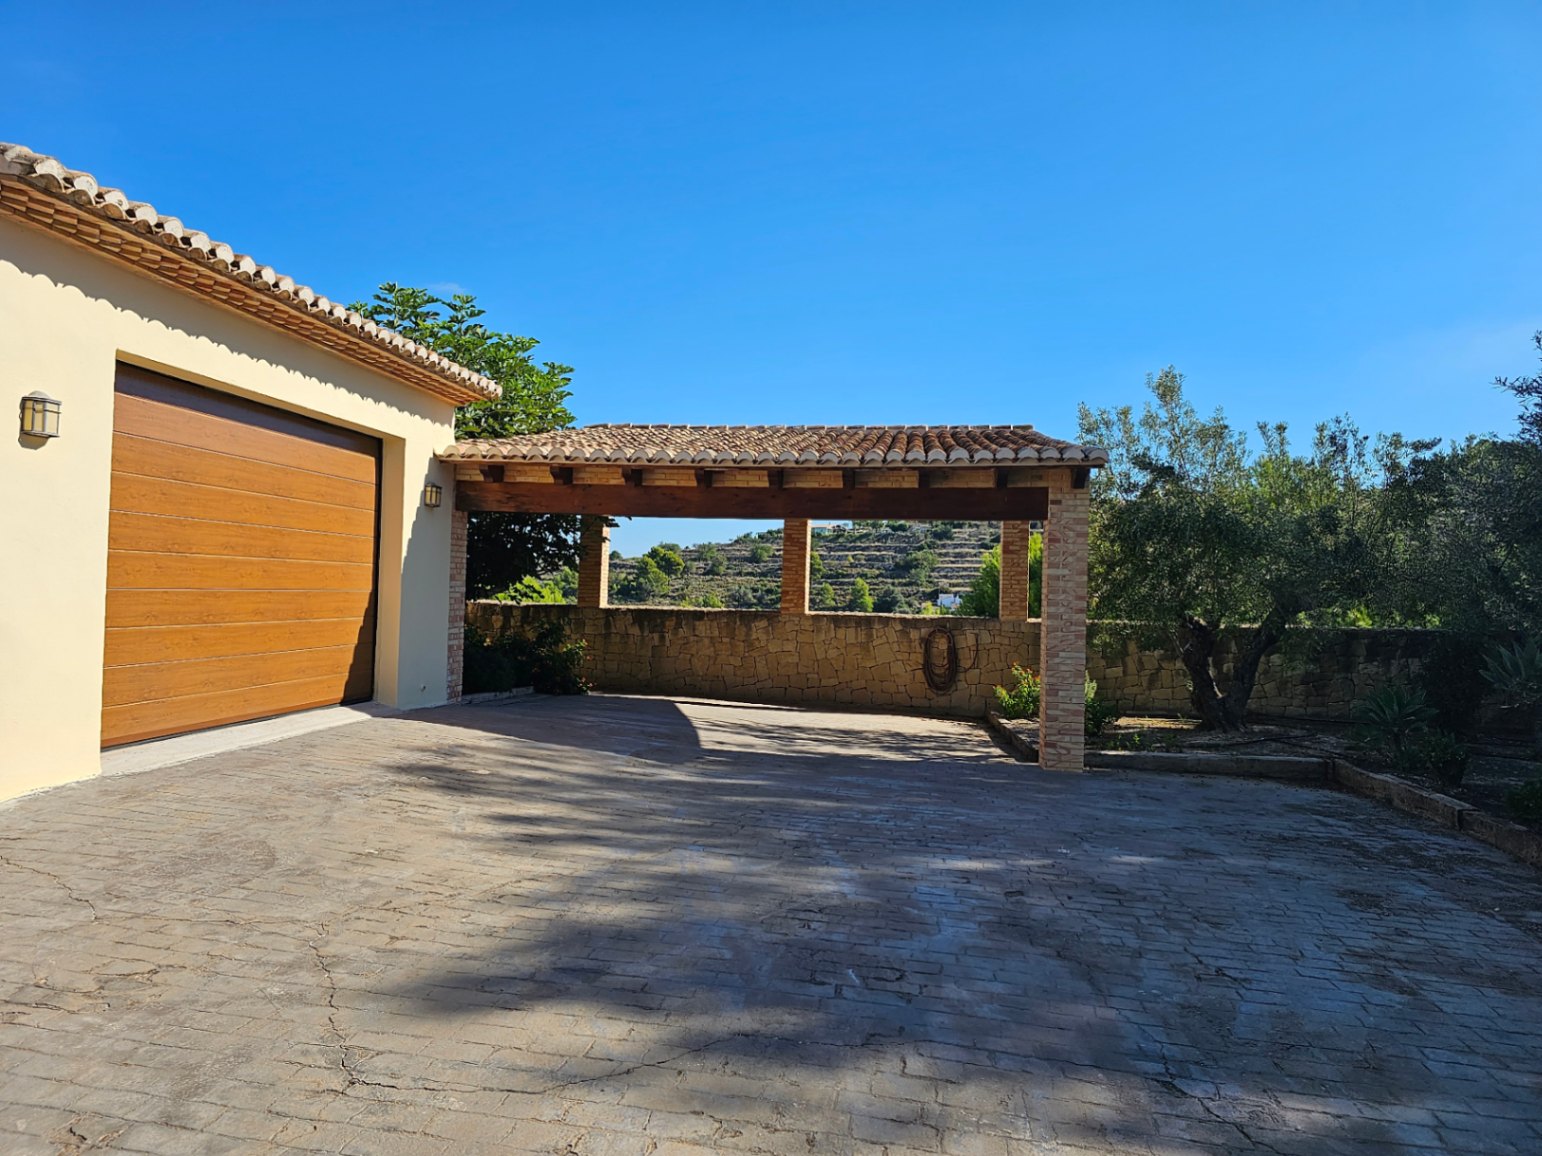 RUSTIC FINCA FOR SALE IN A UNIQUE ENCLAVE ON THE COAST OF BENISSA